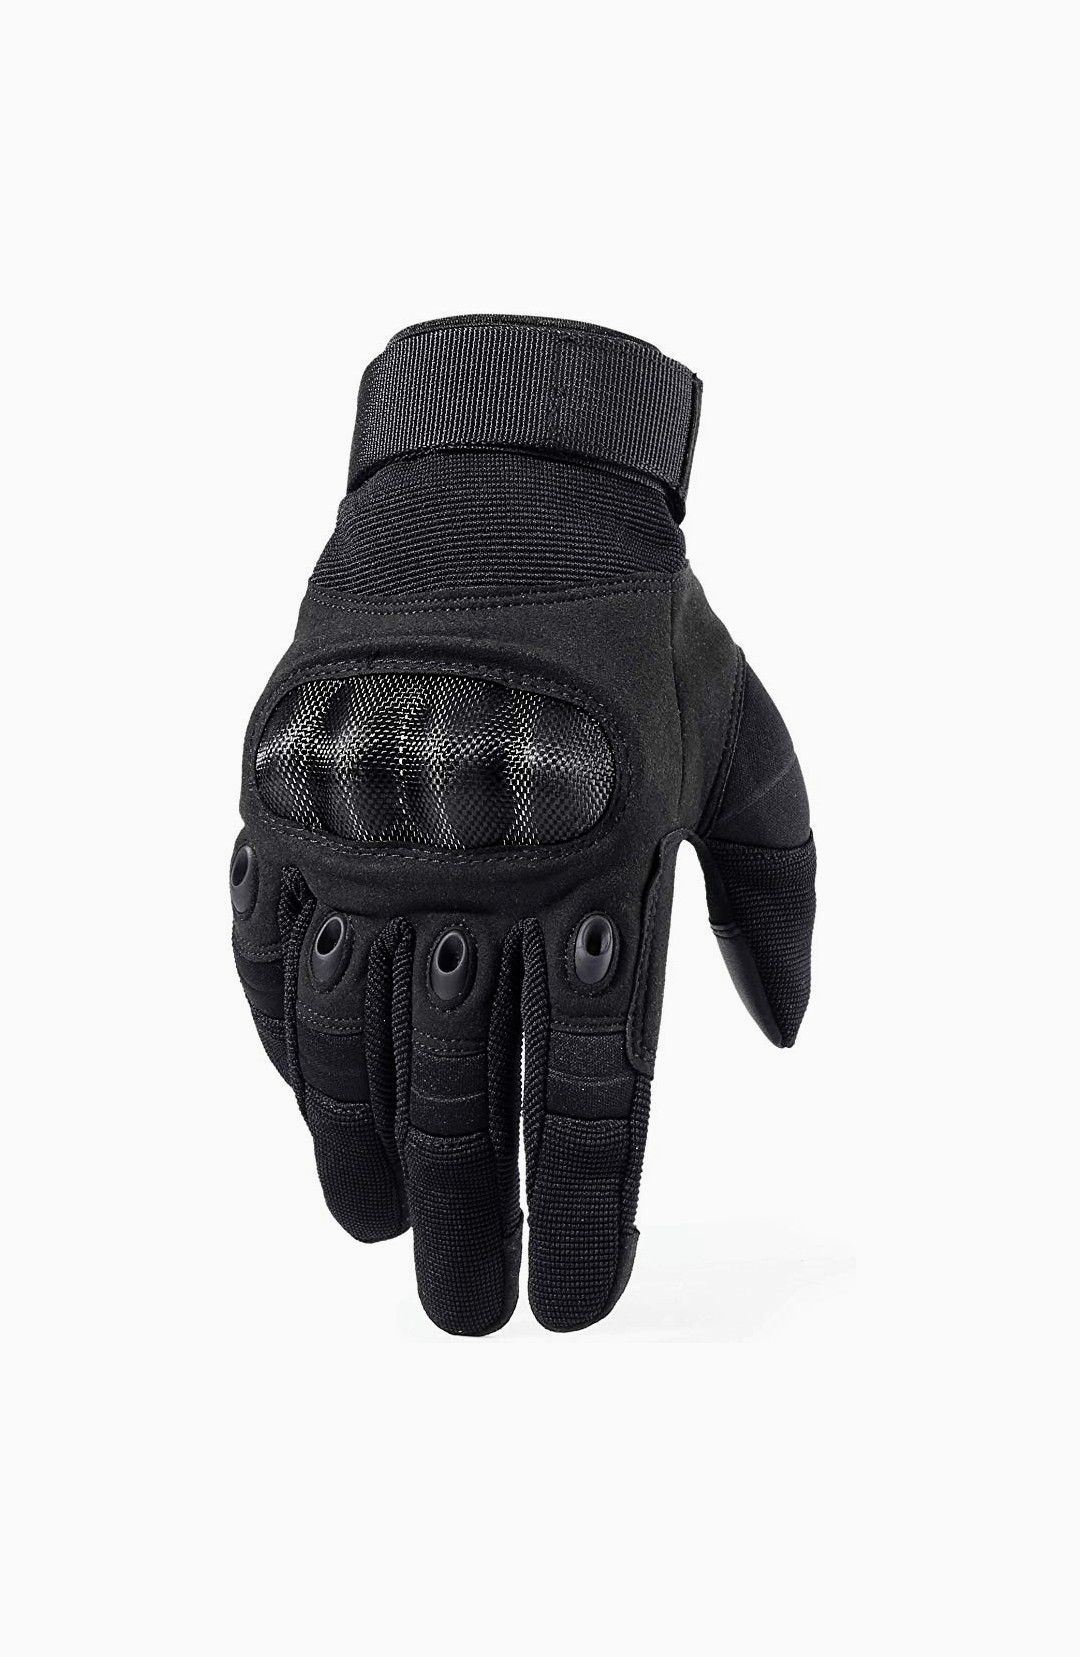 WTACTFUL Touch Screen Motorcycle Full Finger Gloves for Cycling Motorbike ATV Hunting Hiking Riding Climbing Operating Work Sports Gloves